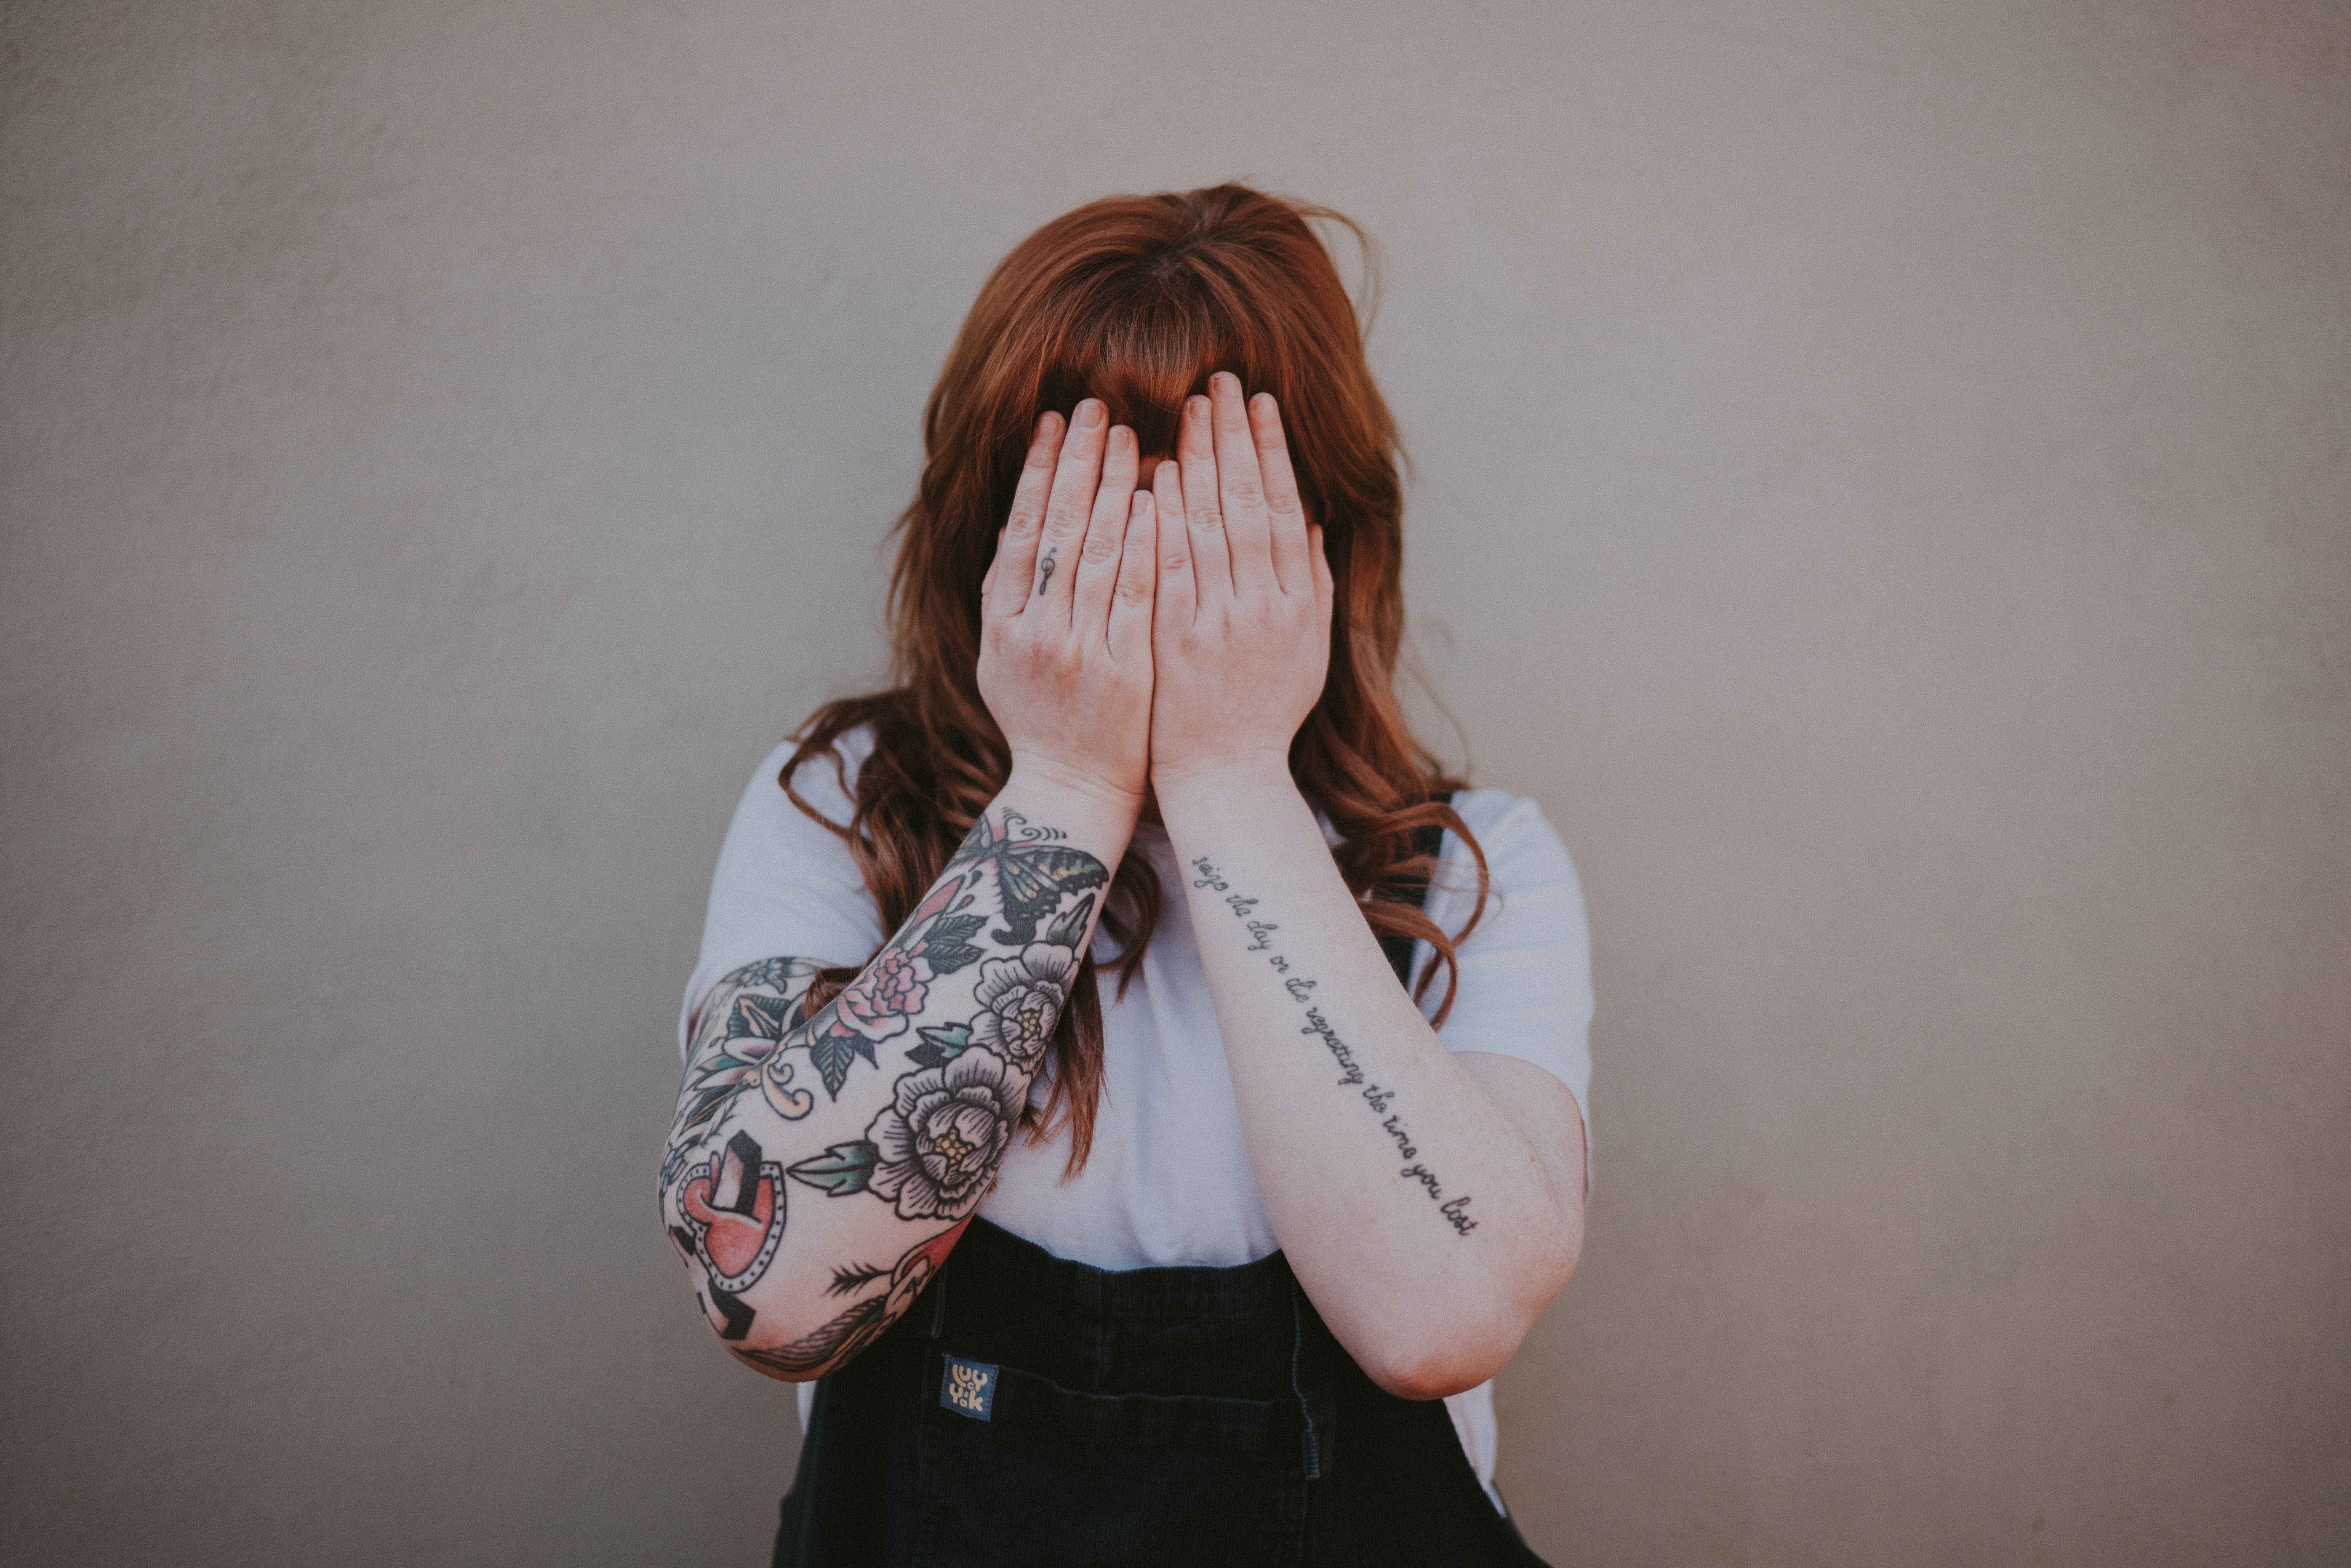 A person with long red hair and tattooed arms covers their face with their hands.